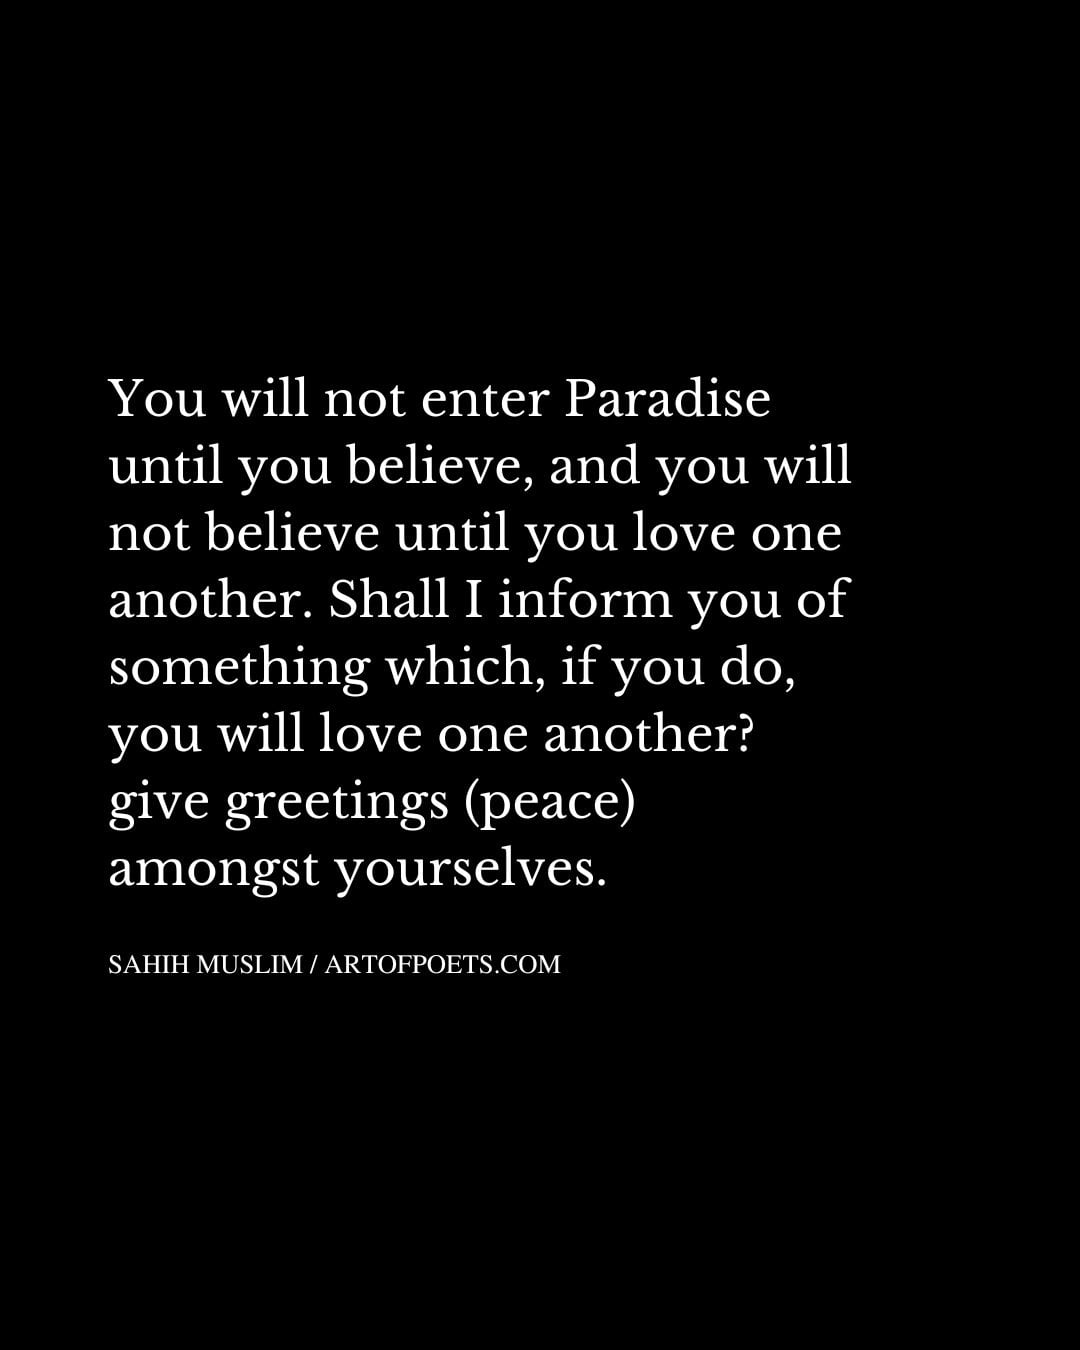 You will not enter Paradise until you believe and you will not believe until you love one another